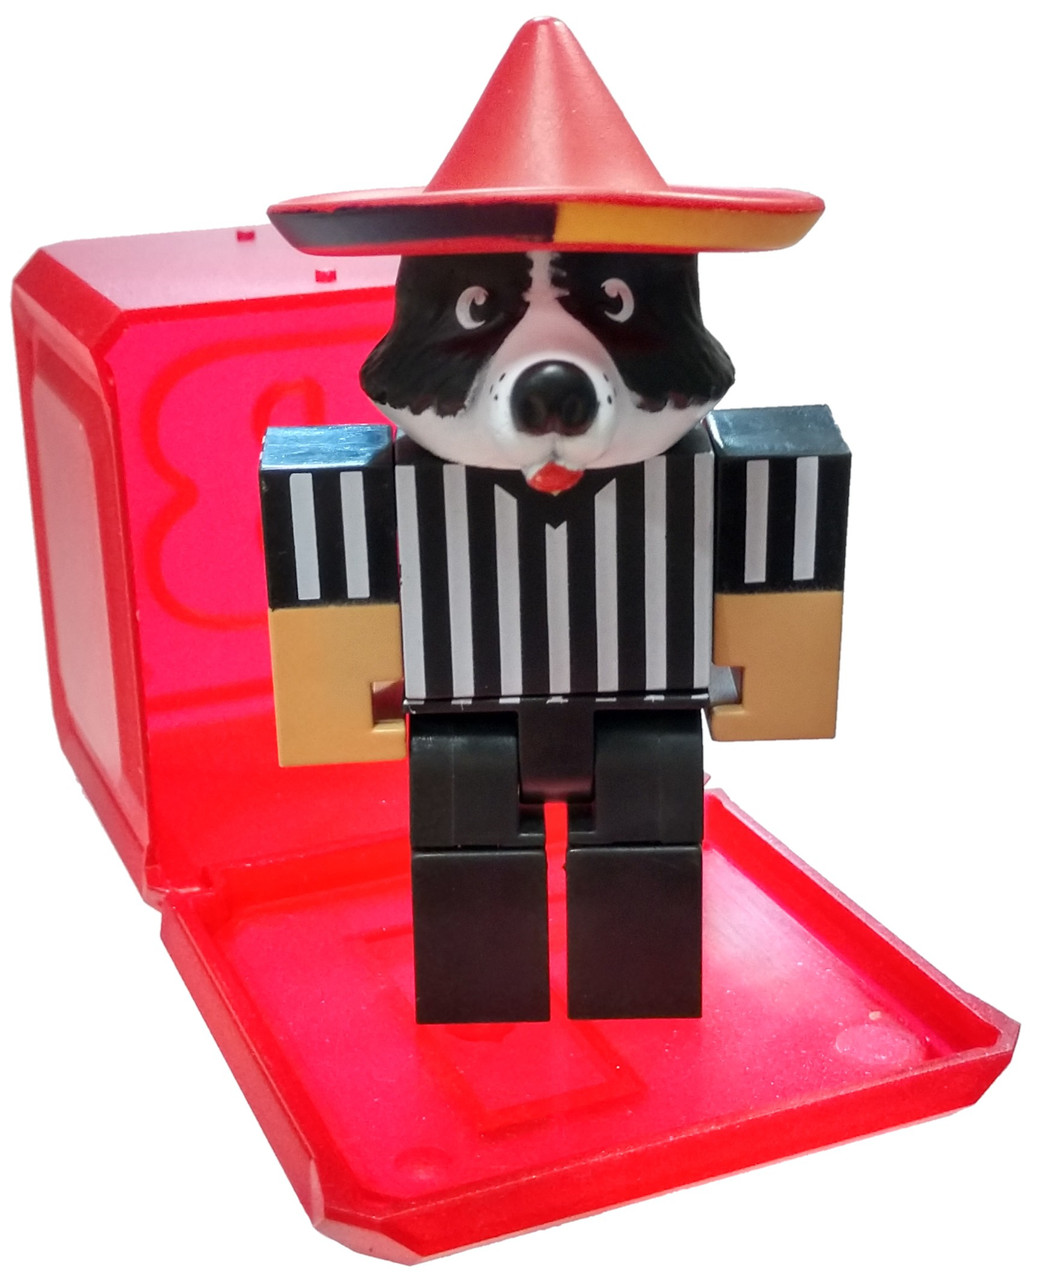 Roblox Celebrity Collection Series 5 High School Life Referee 3 Mini Figure With Red Cube And Online Code Loose Jazwares Toywiz - roblox high school life roblox